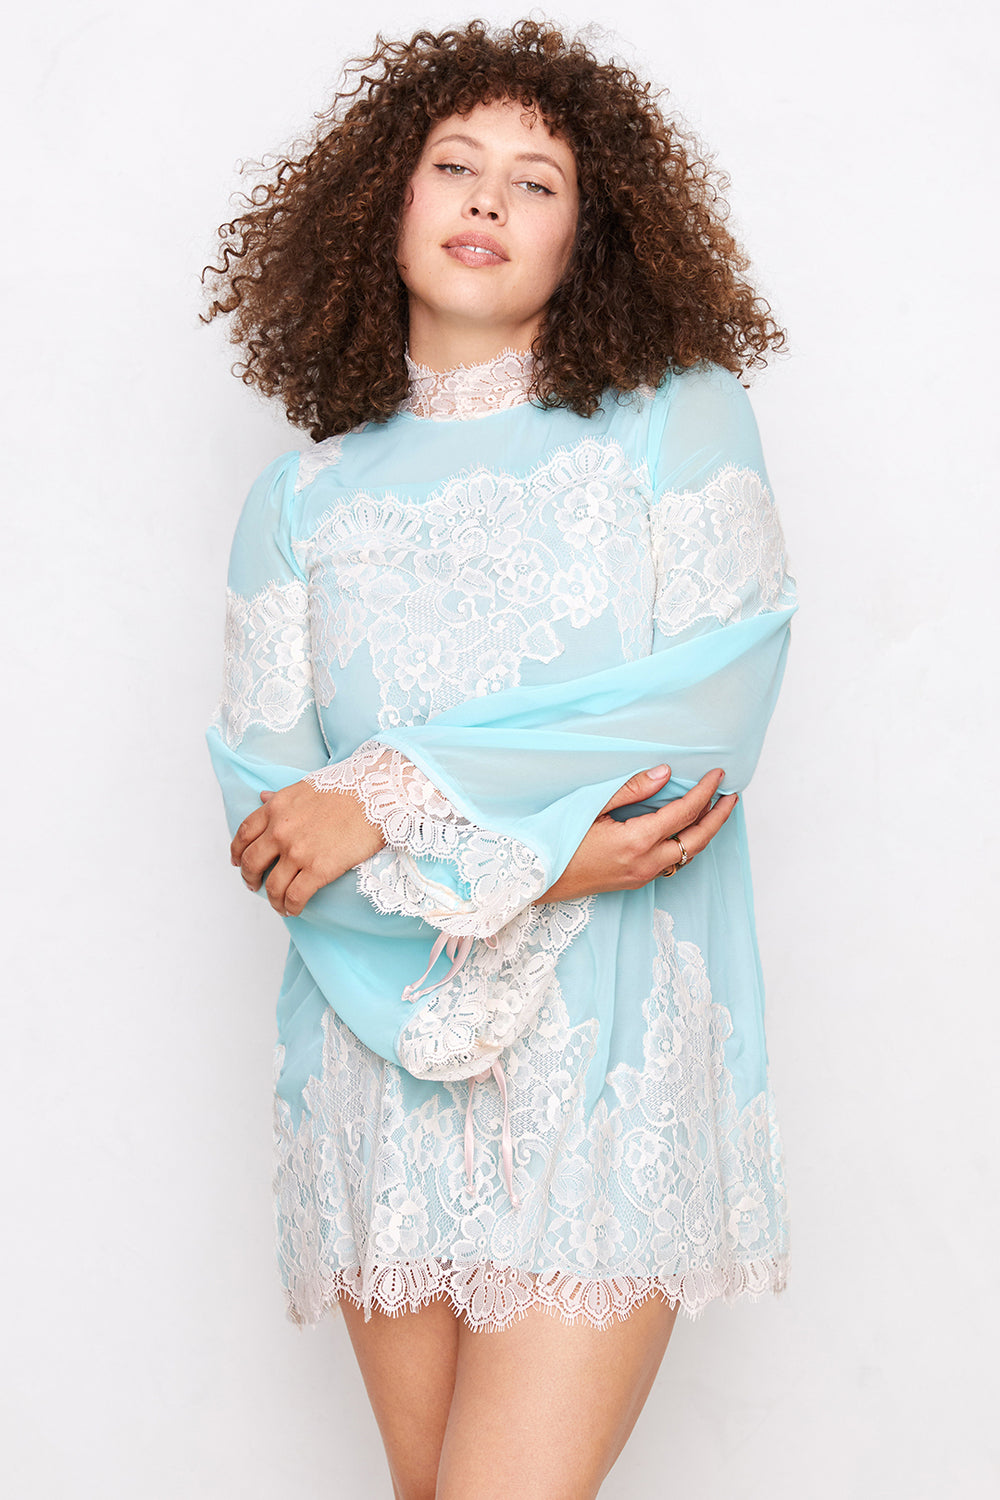 Queen 4 A Day Dress | Bright Baby Blue